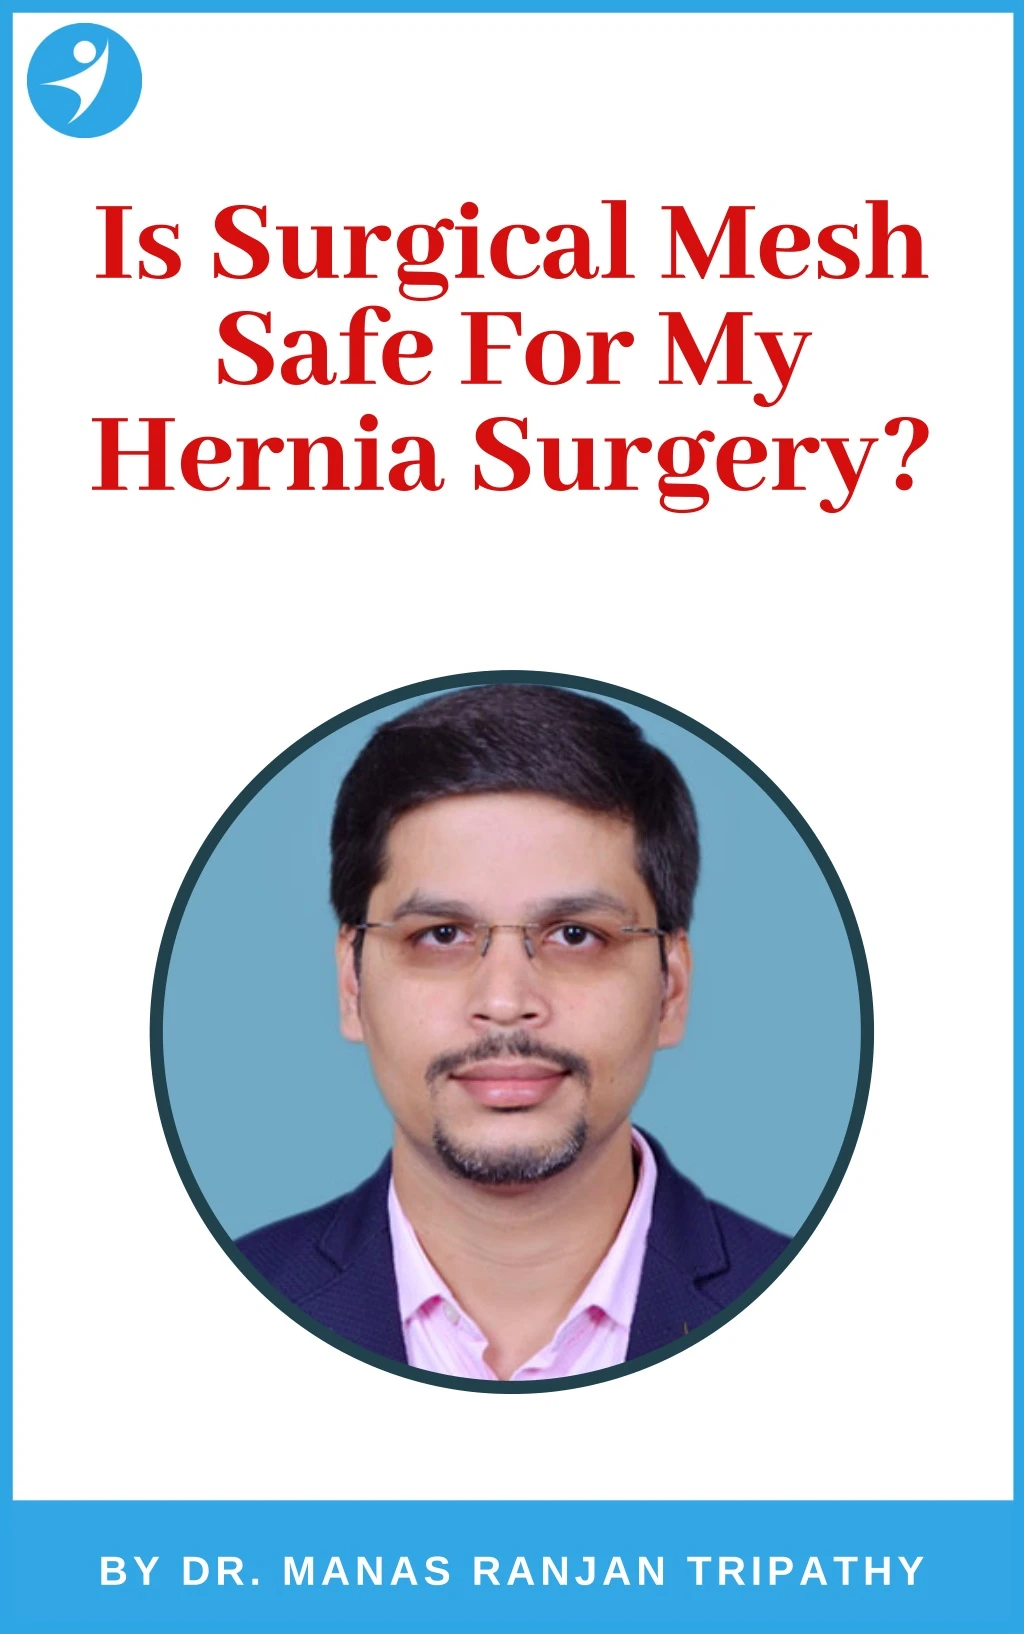 is surgical mesh safe for my hernia surgery